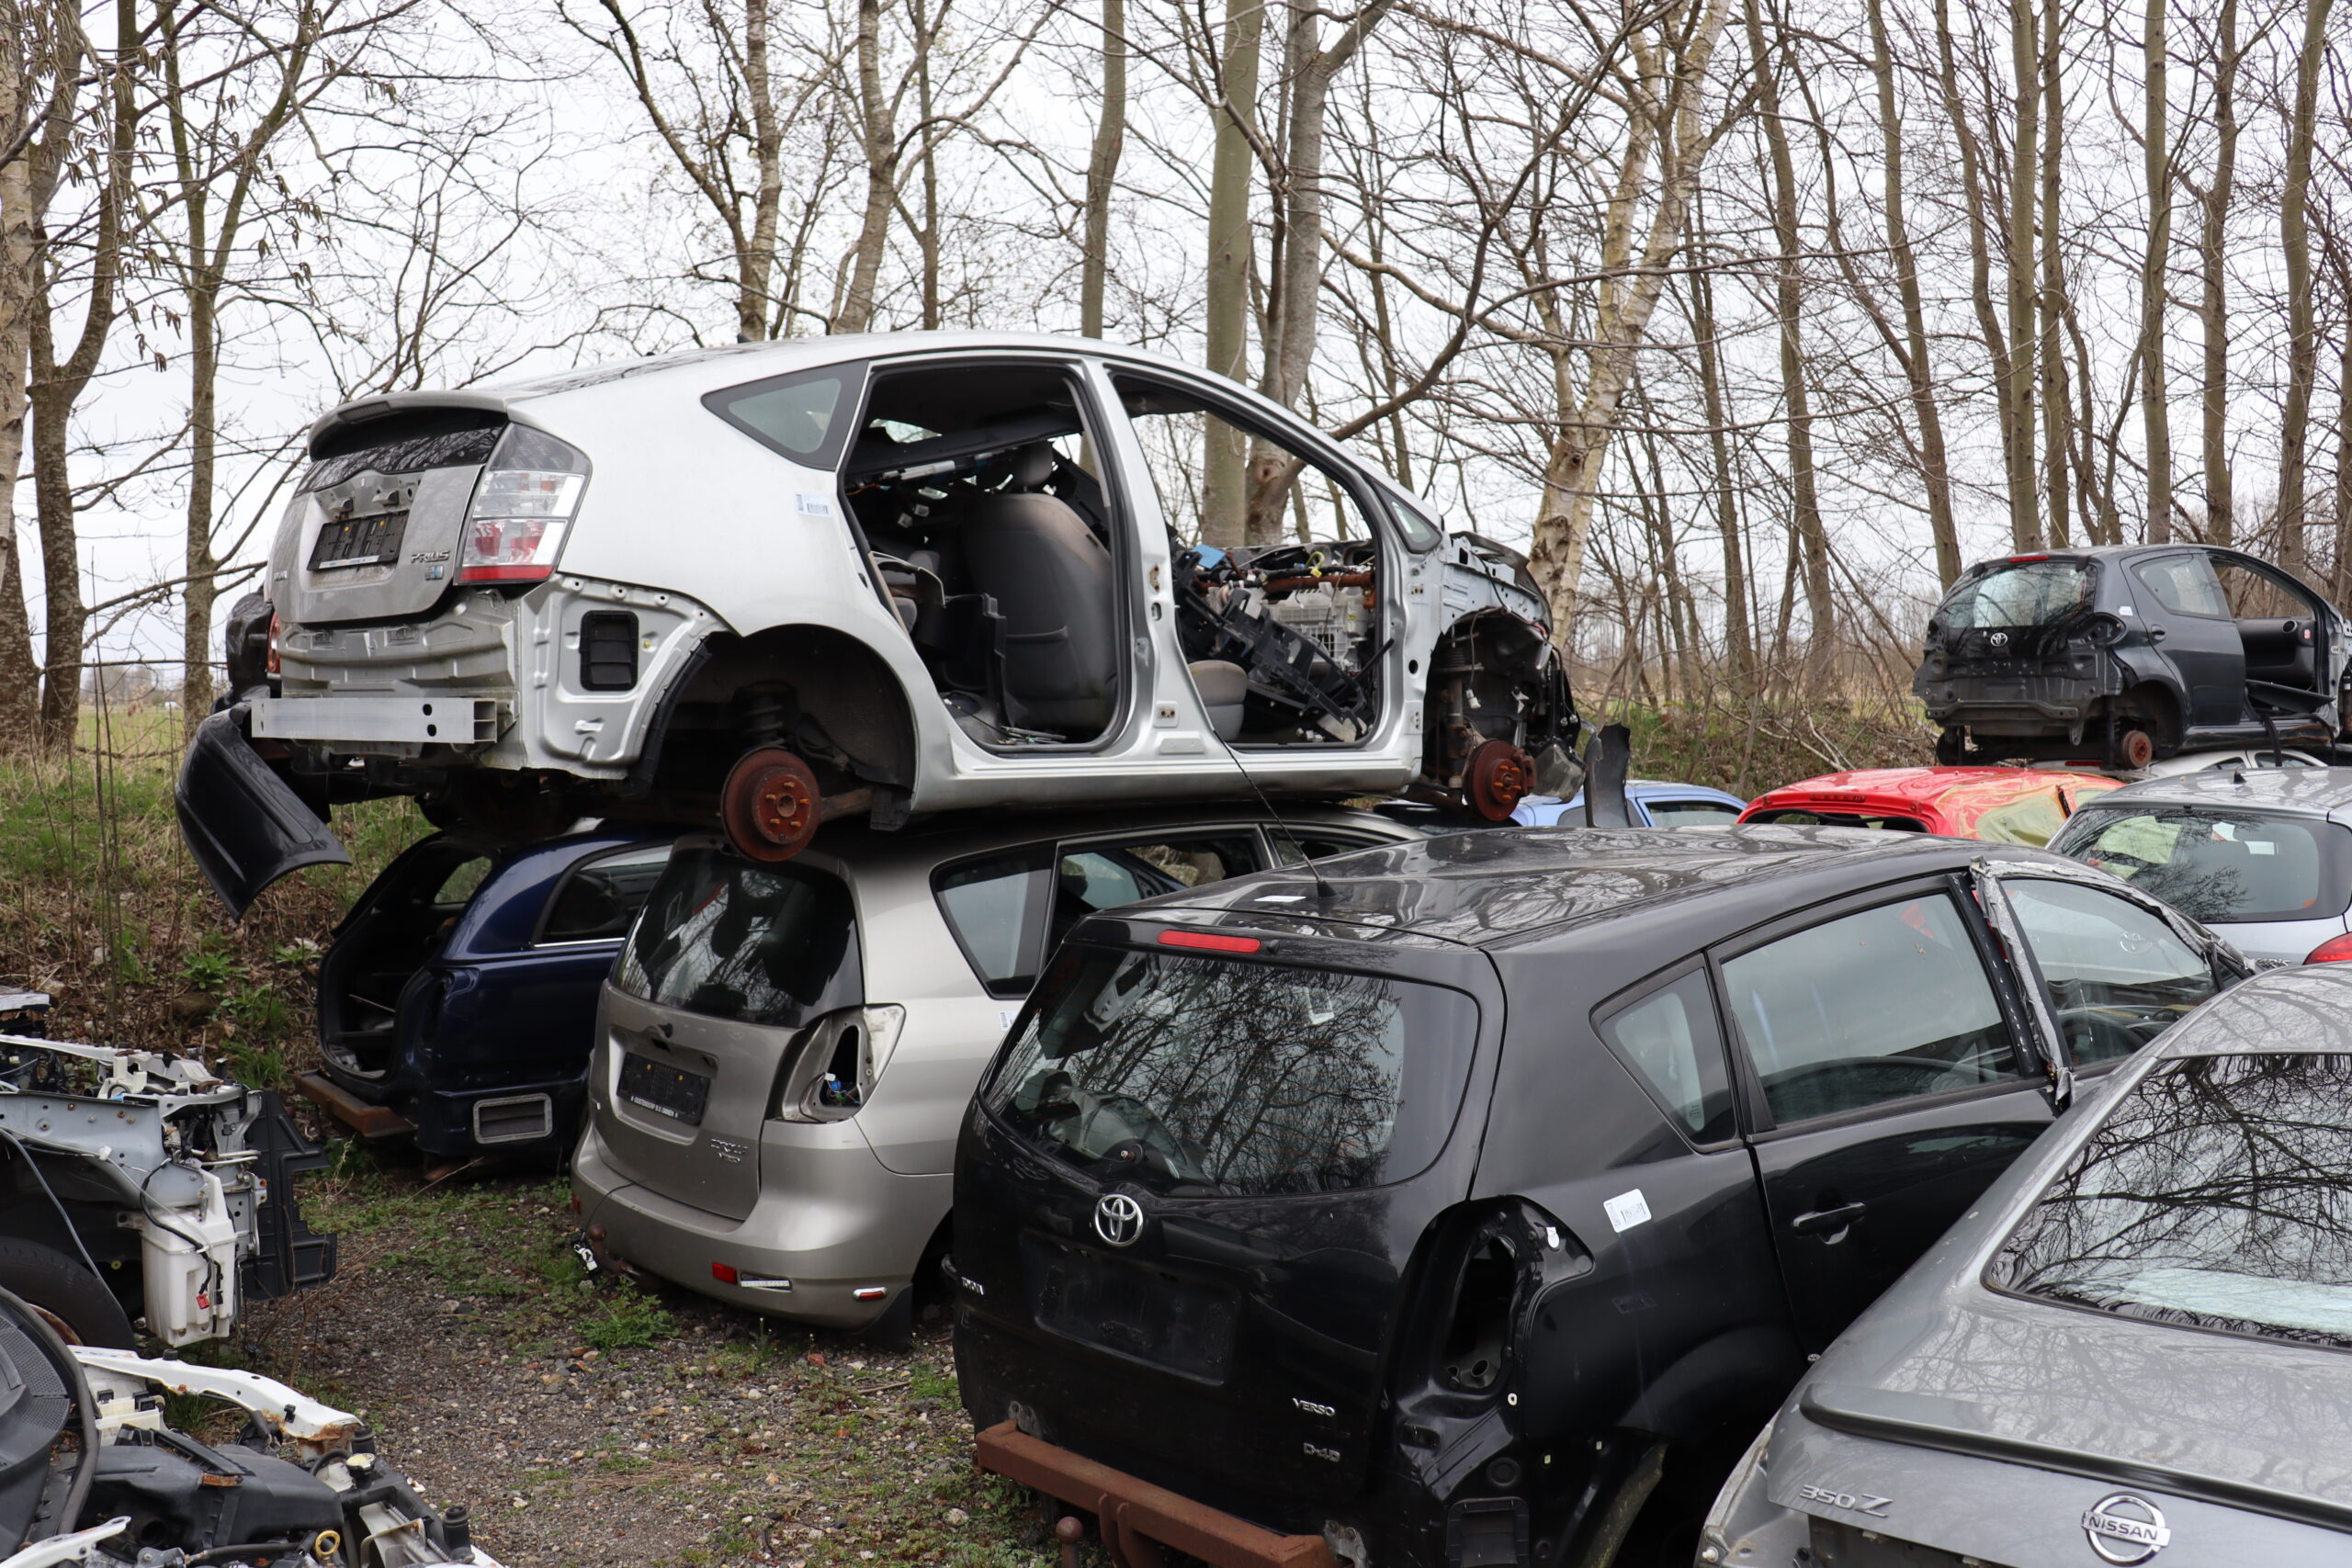 Official response from ARN, on behalf of Stichting Auto Recycling (Auto Recycling Foundation), to new European regulations governing end-of-life vehicles